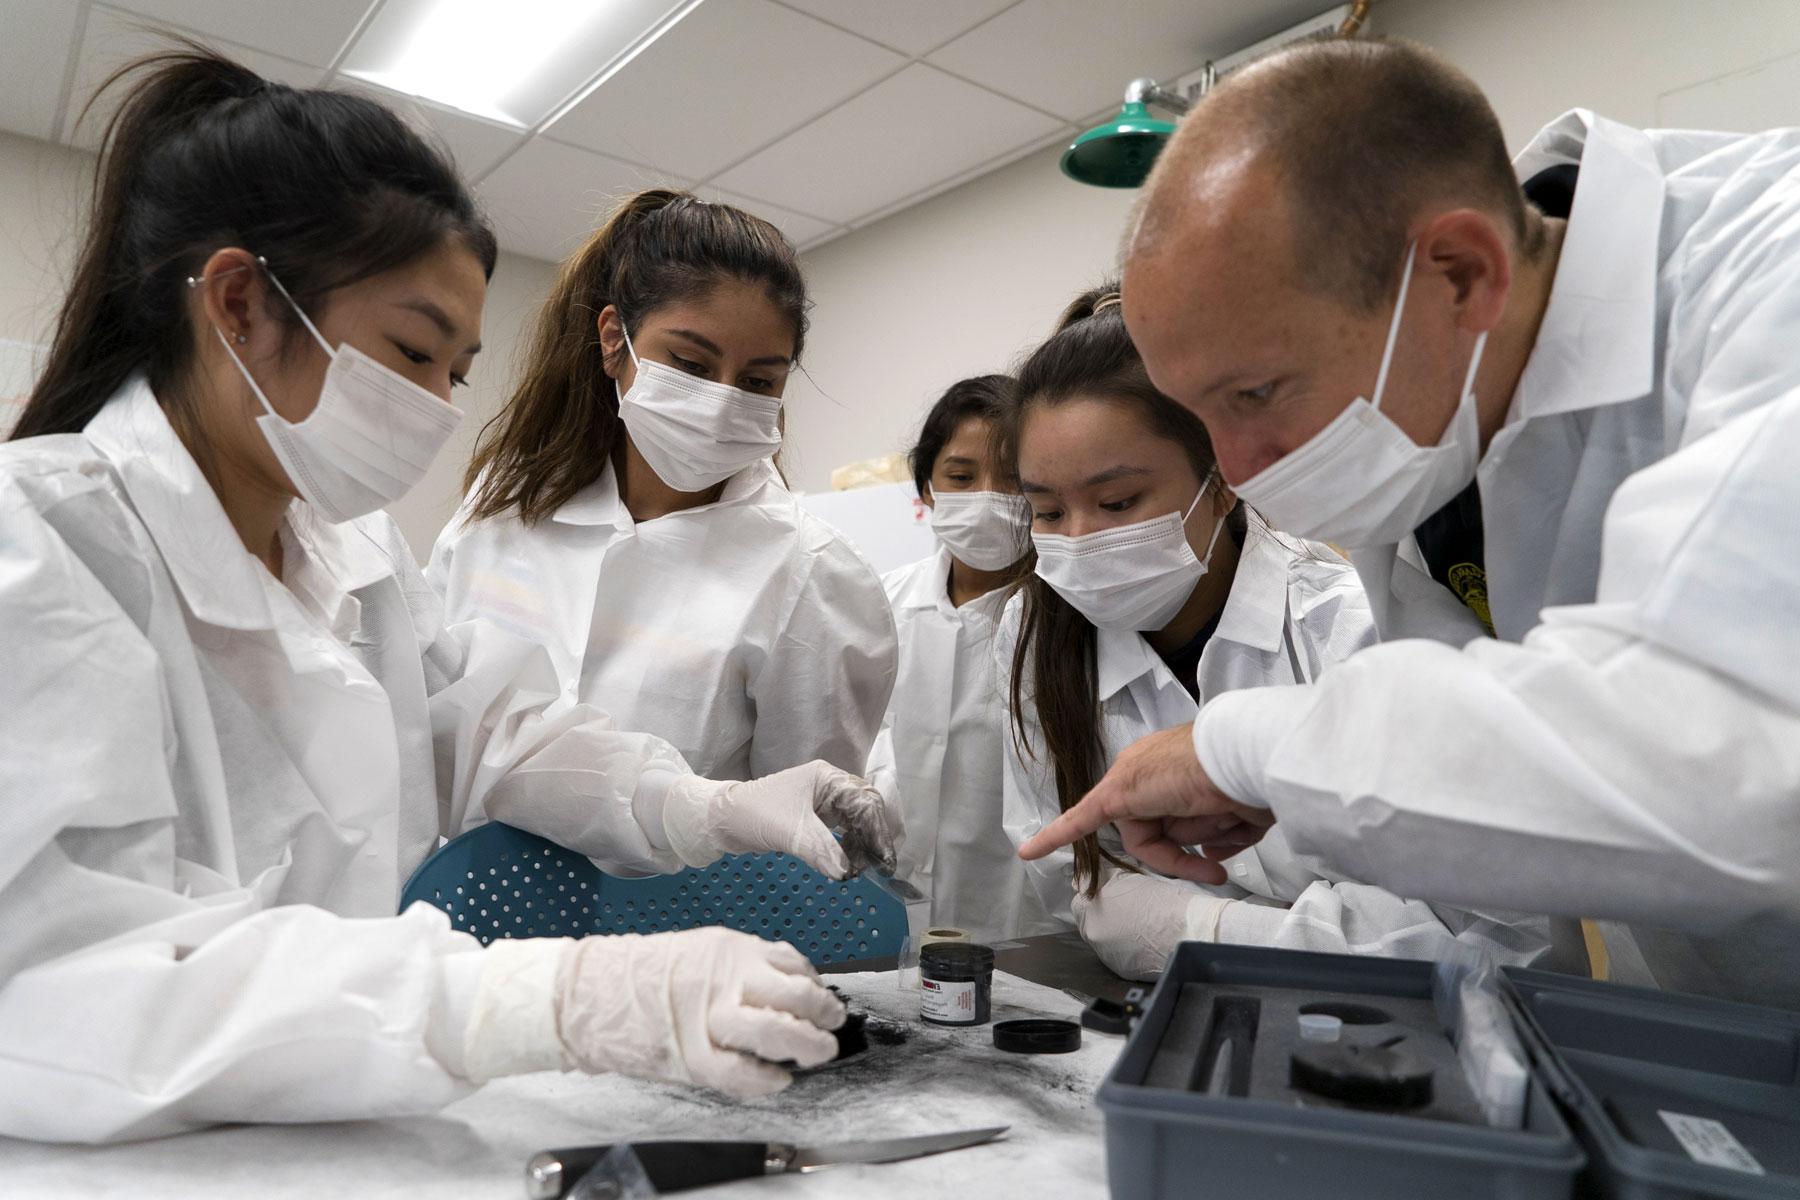 Forensic science students in lab image